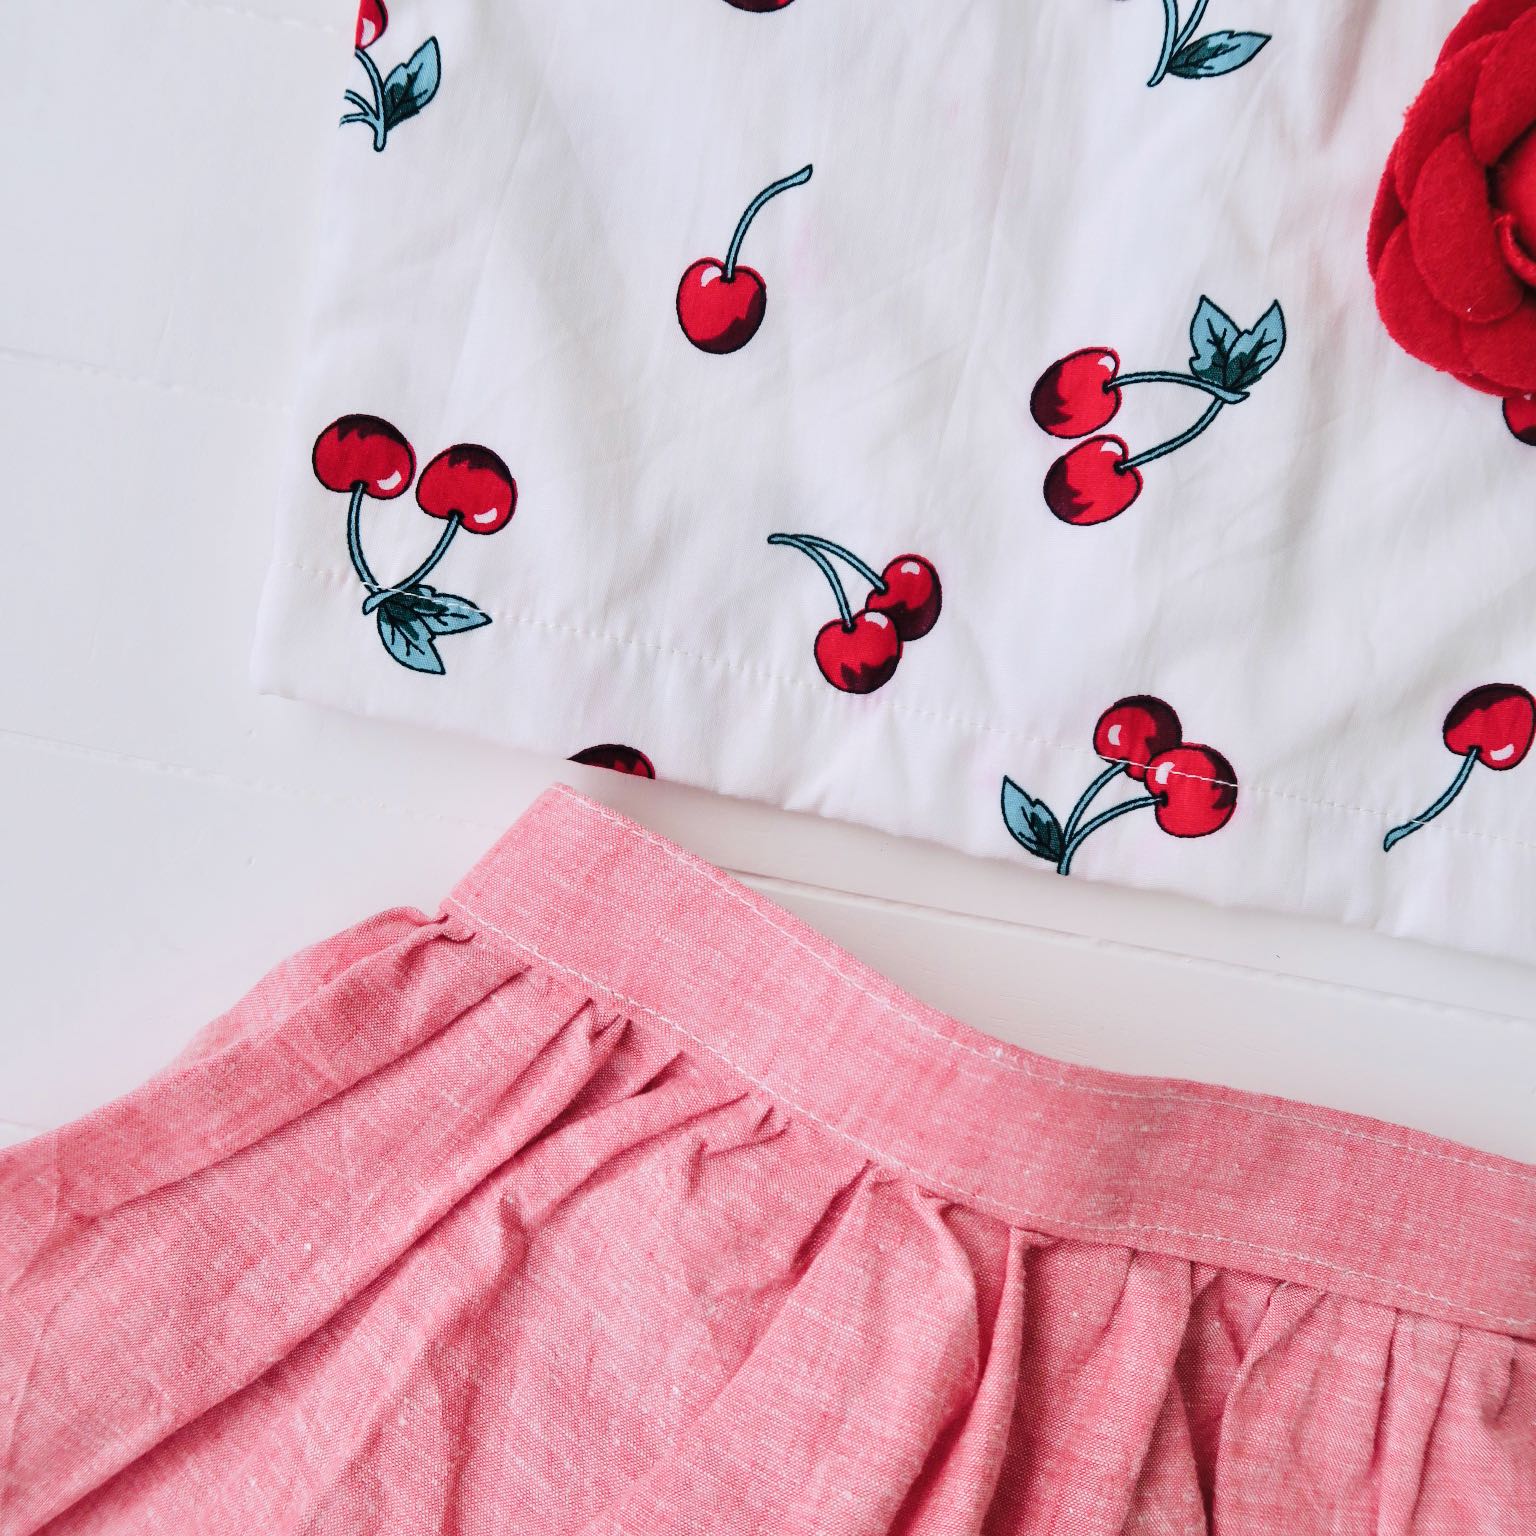 Sage - Tie-strap Top and Skirt in Cherries White and Red Linen - Lil' Tati